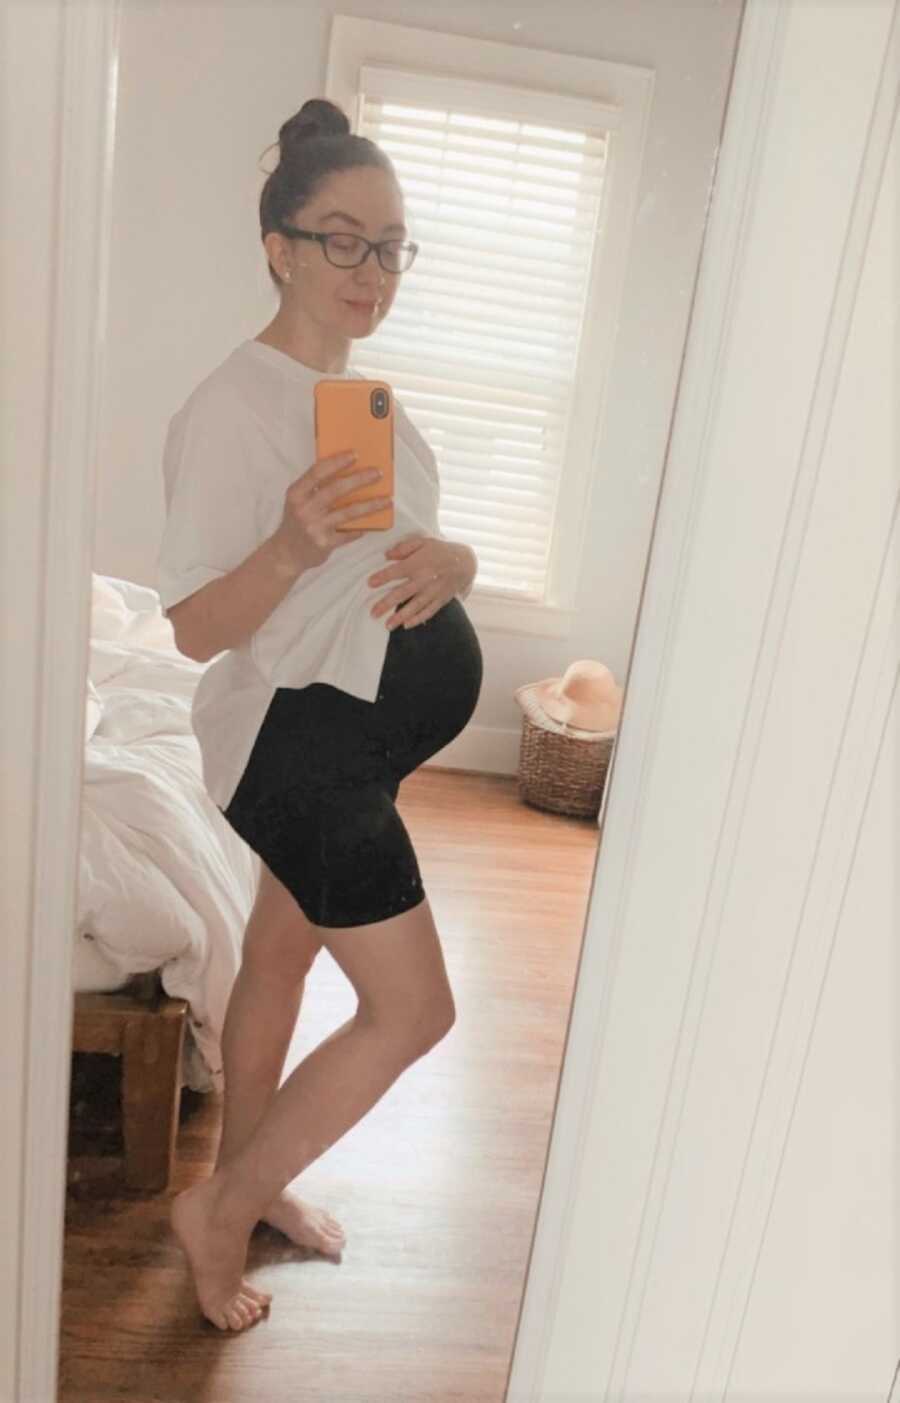 Jaclyn takes a baby bump picture at seven months pregnant.